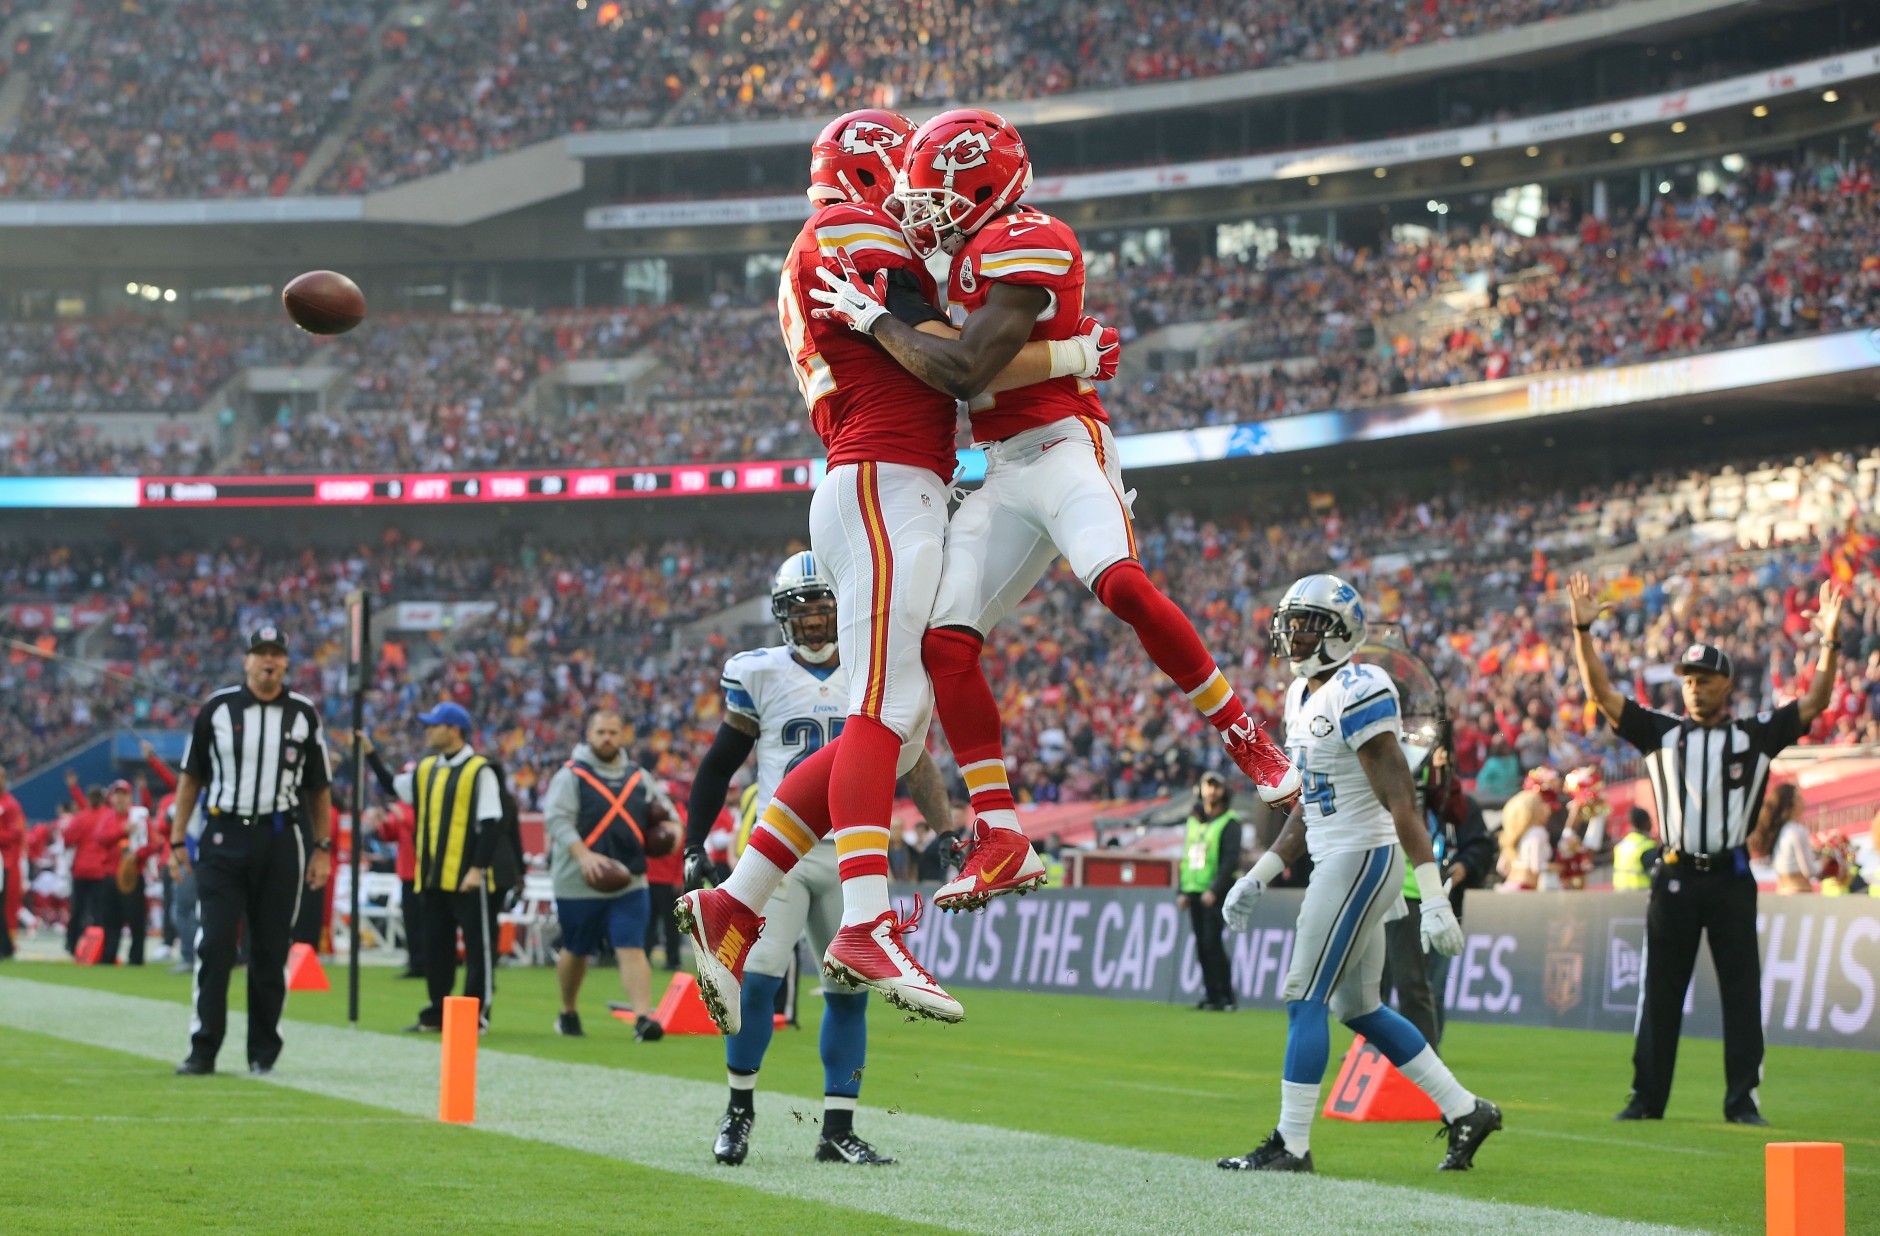 Kansas City Chiefs wide receiver De'Anthony Thomas (13), right, celebrates after scoring a touchdown during the NFL football game between Detroit Lions and Kansas City Chiefs Wembley Stadium in London,  Sunday, Nov. 1, 2015. (AP Photo/Tim Ireland)